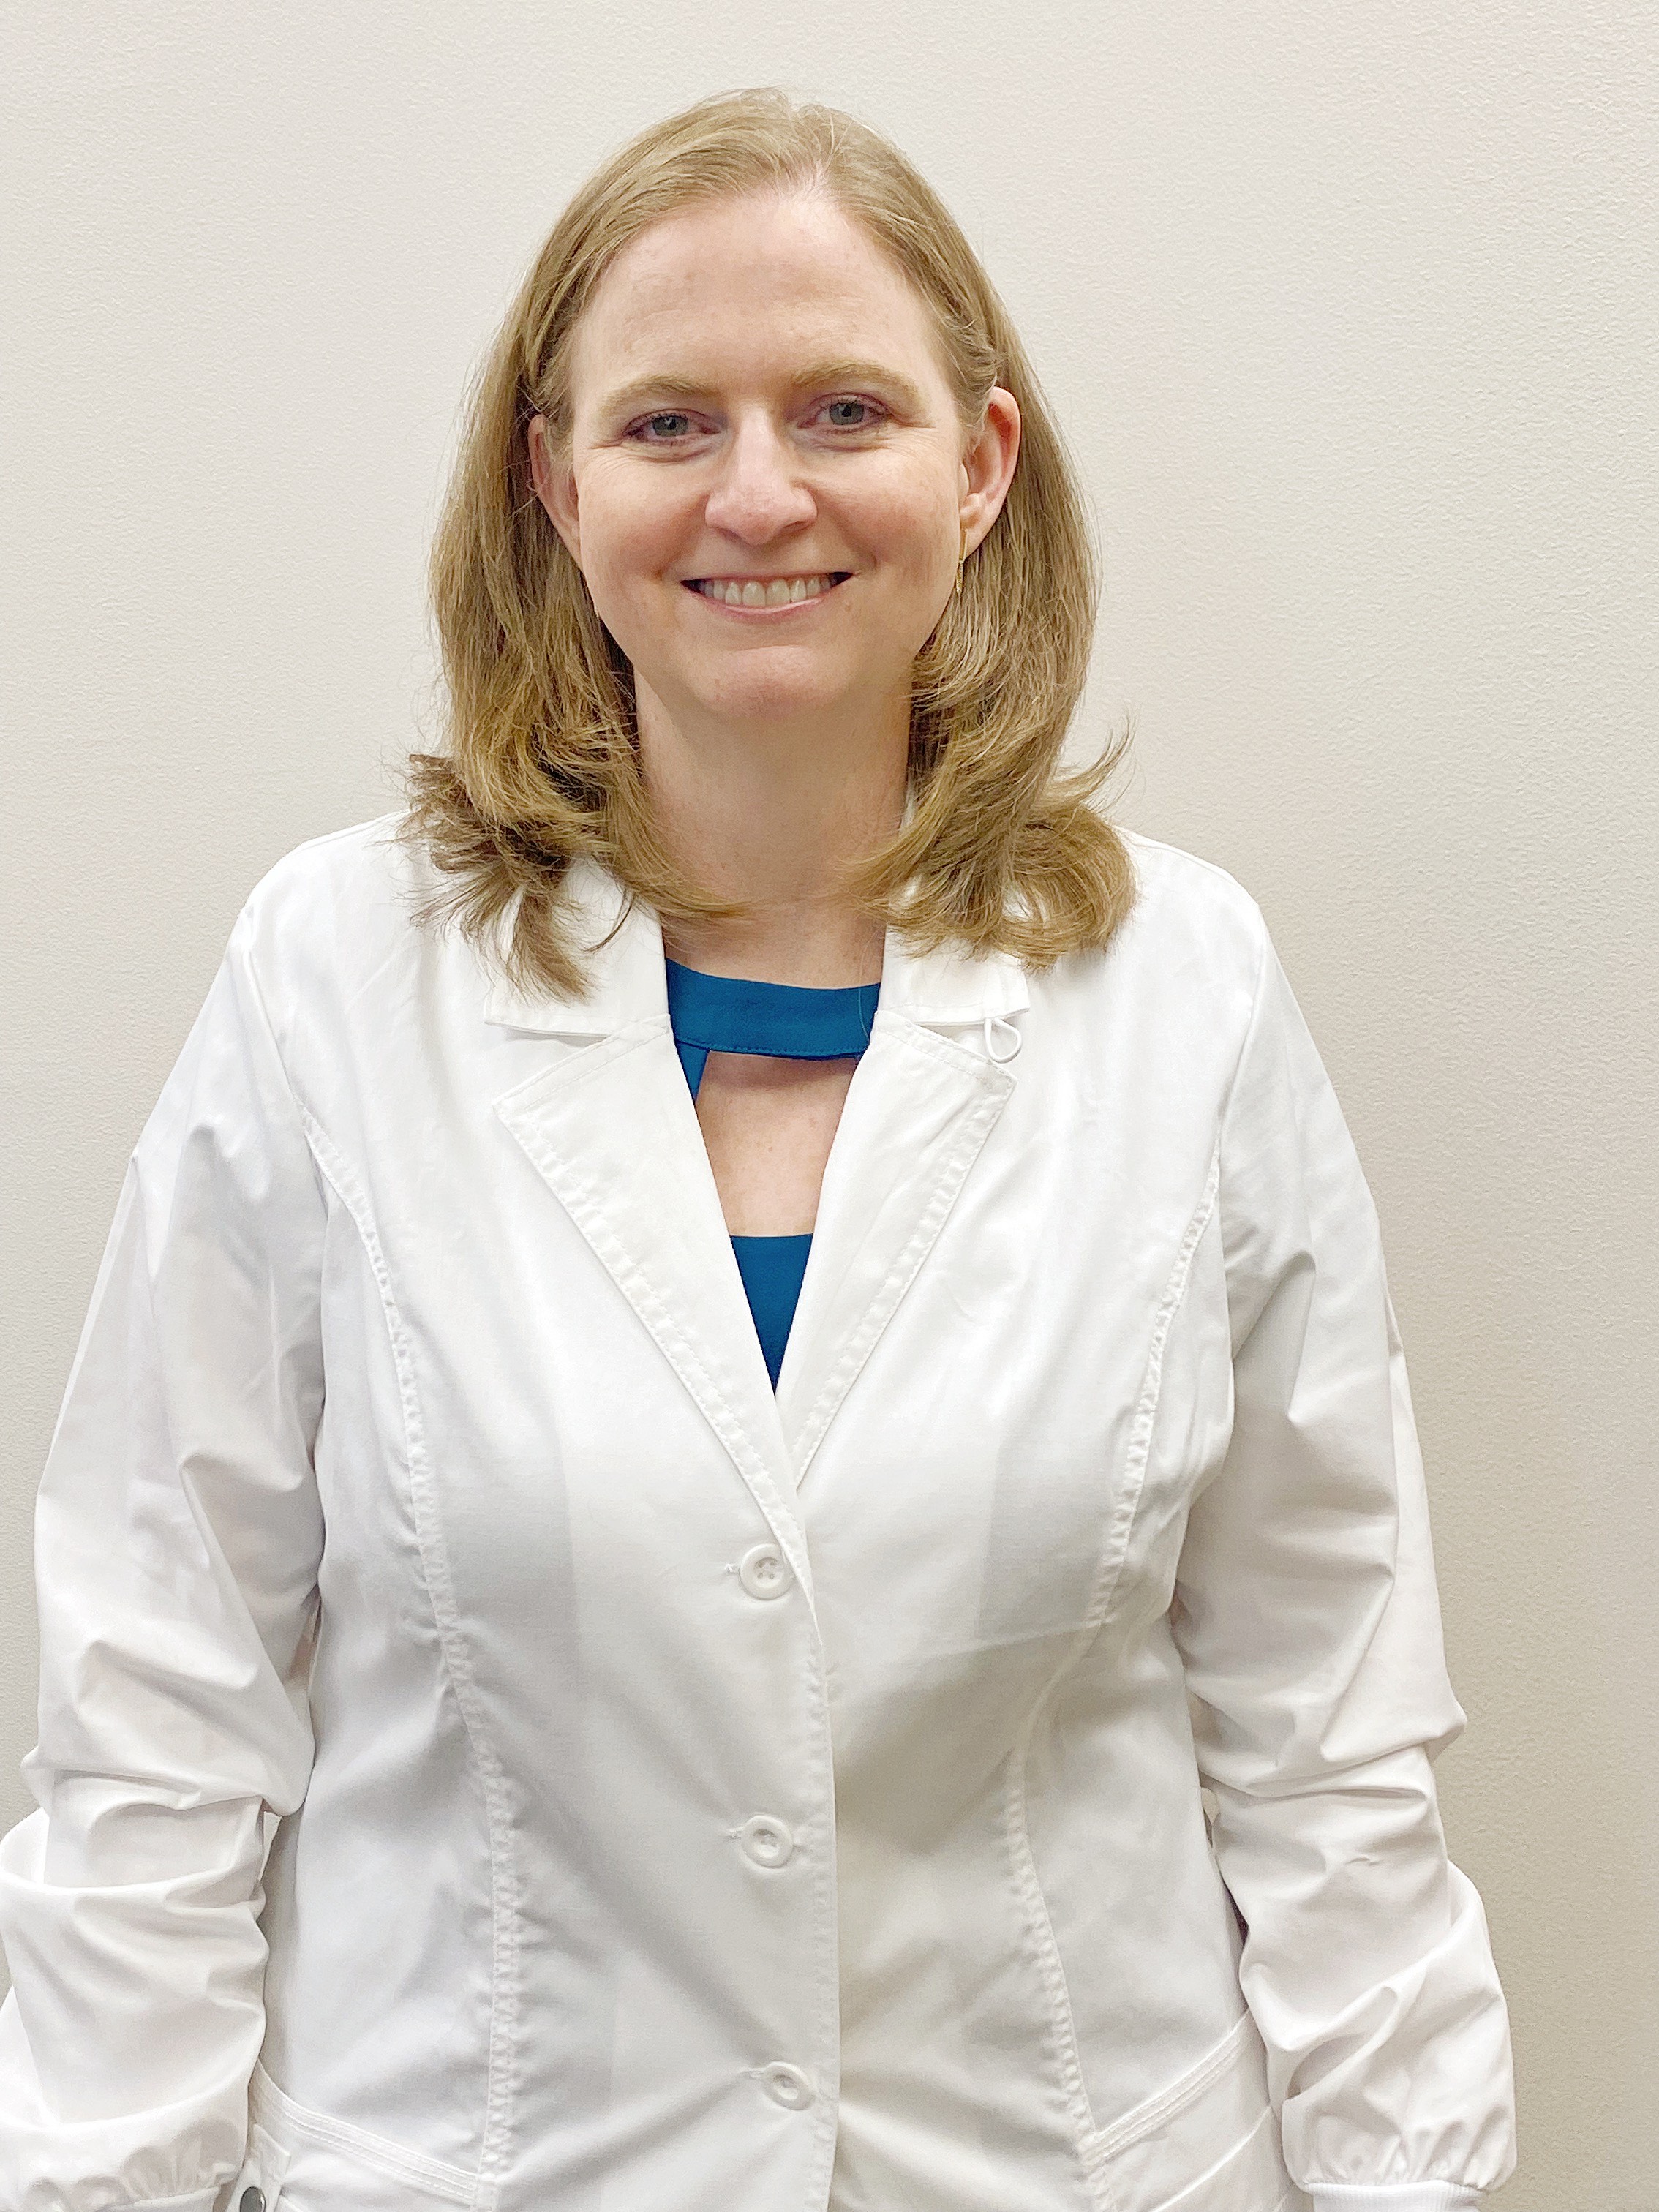 Shannon S. Cooper, MD